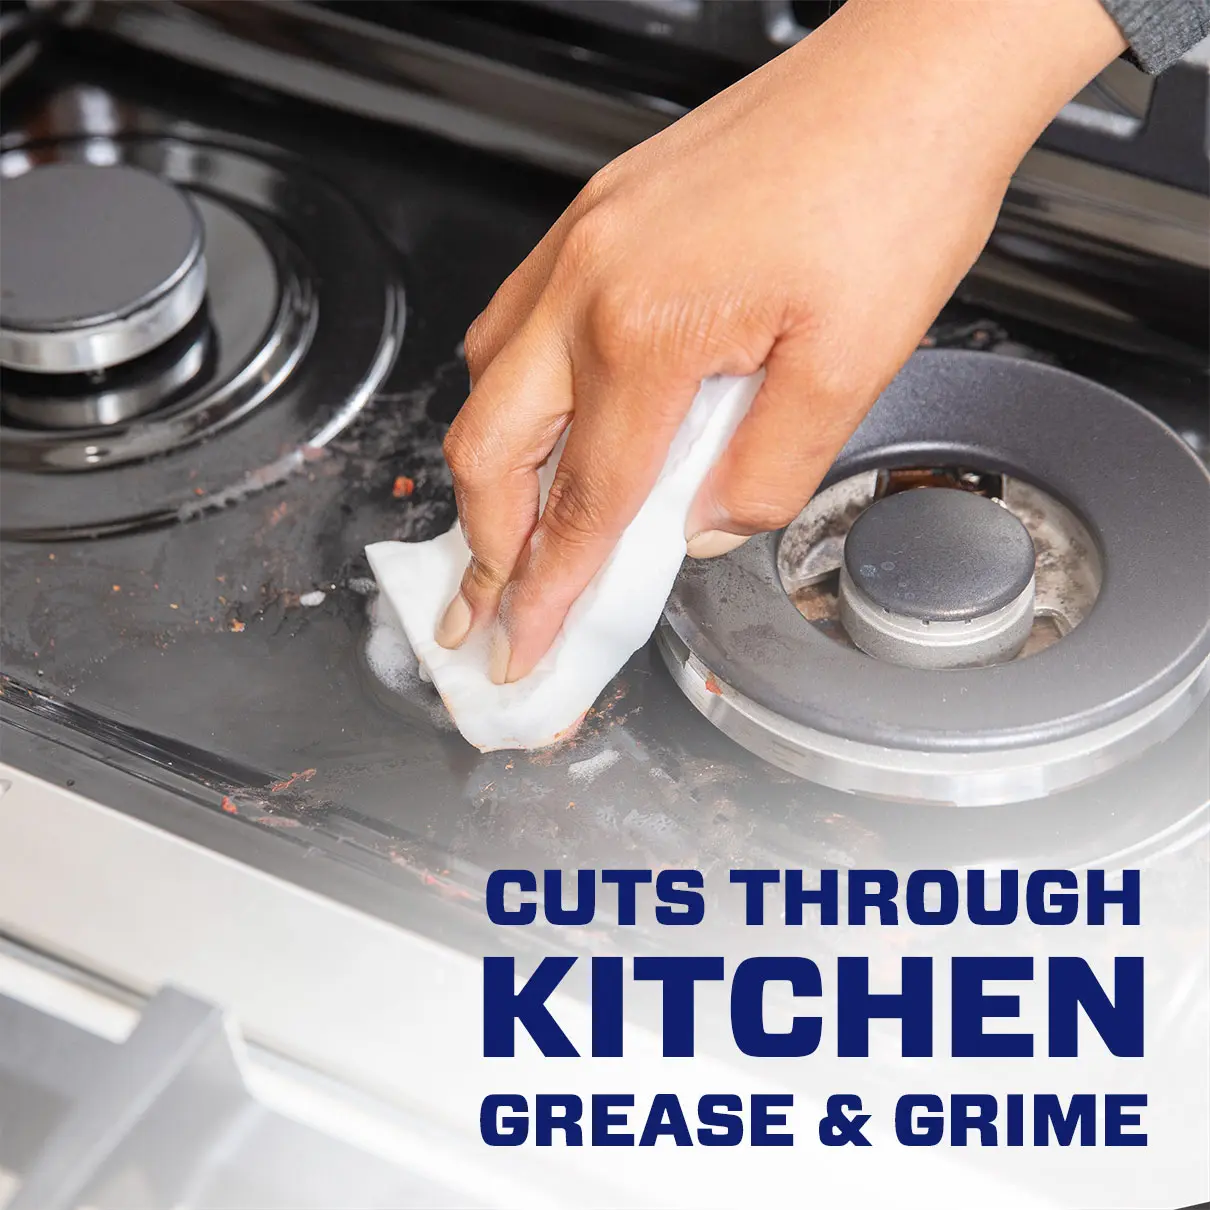 MrClean MagicEraser Variety cuts through kitchen grease & grime